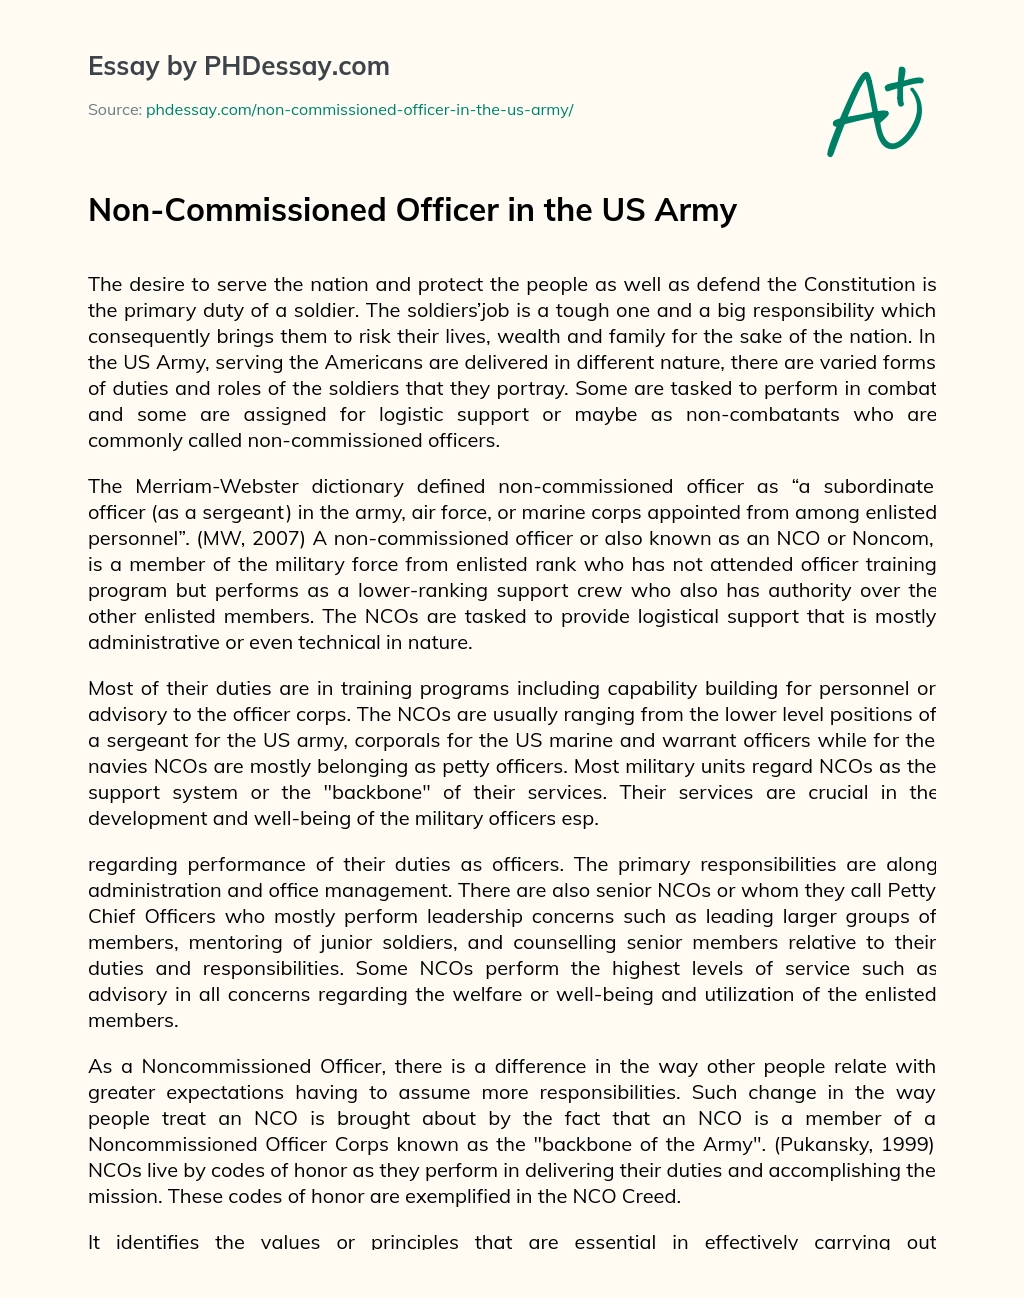 Non-Commissioned Officer in the US Army essay